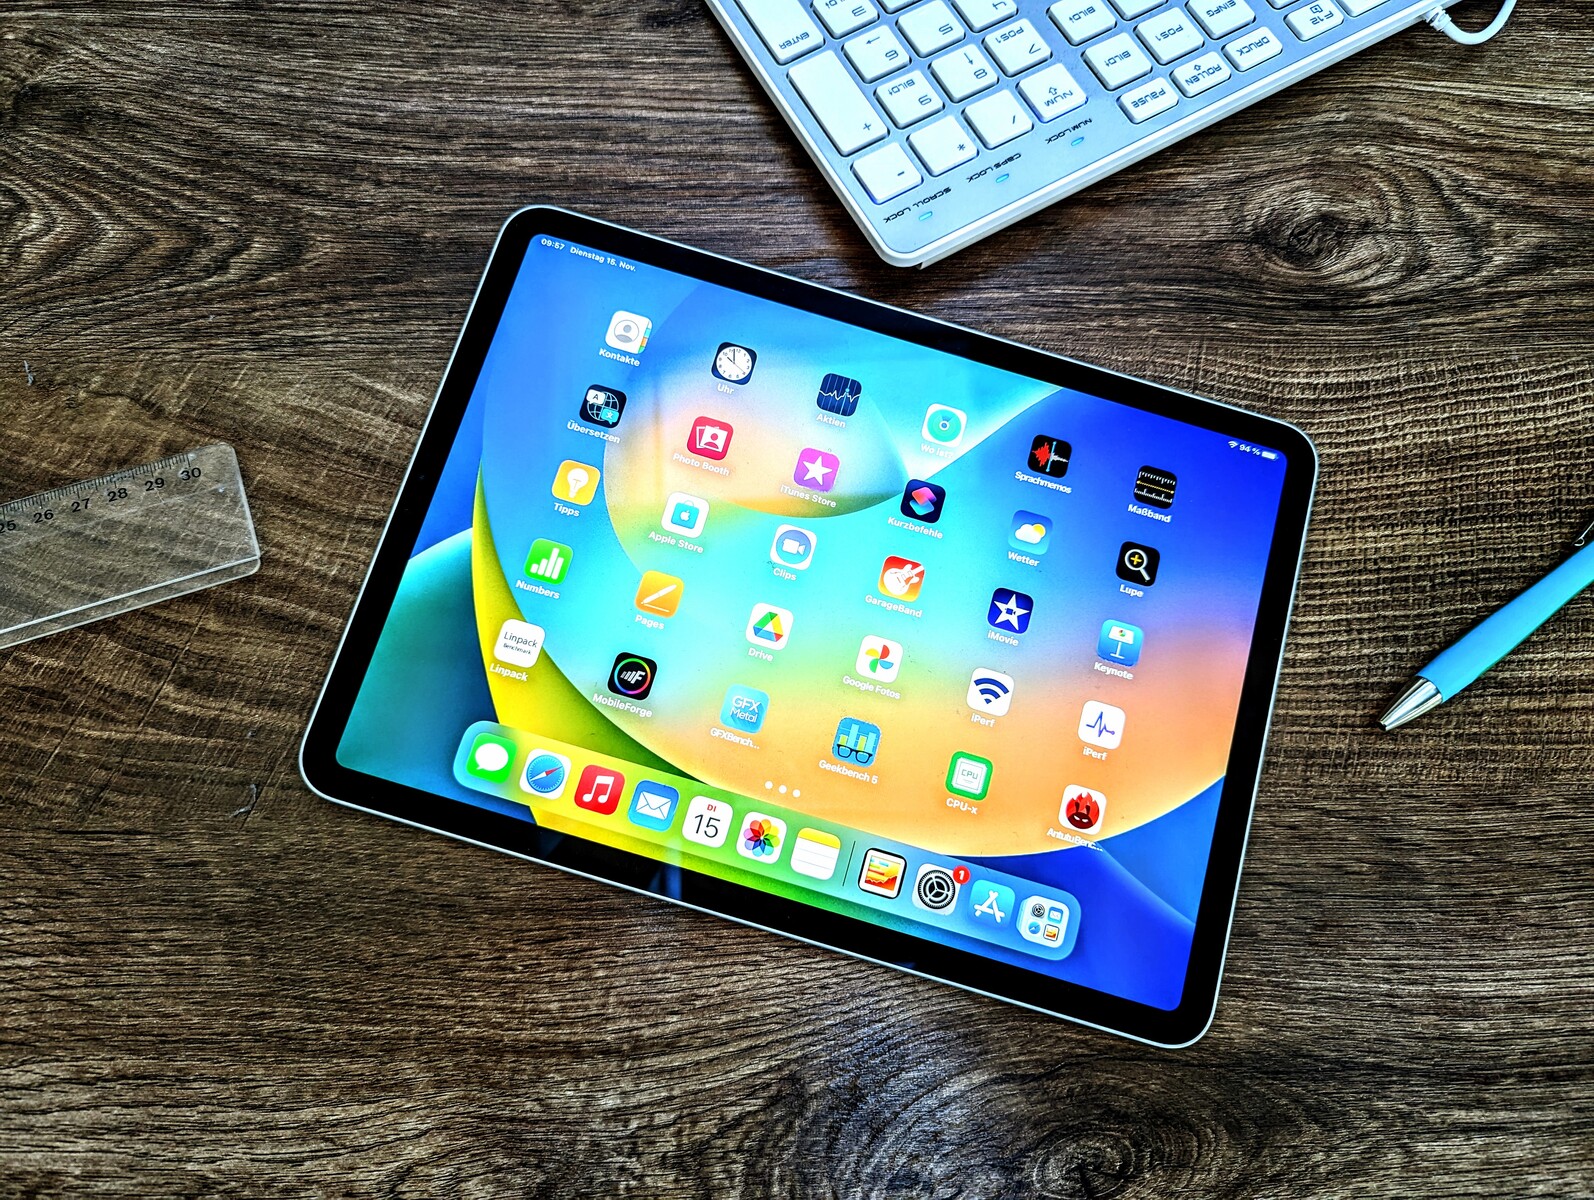 Apple iPad Pro 11 hands-on review